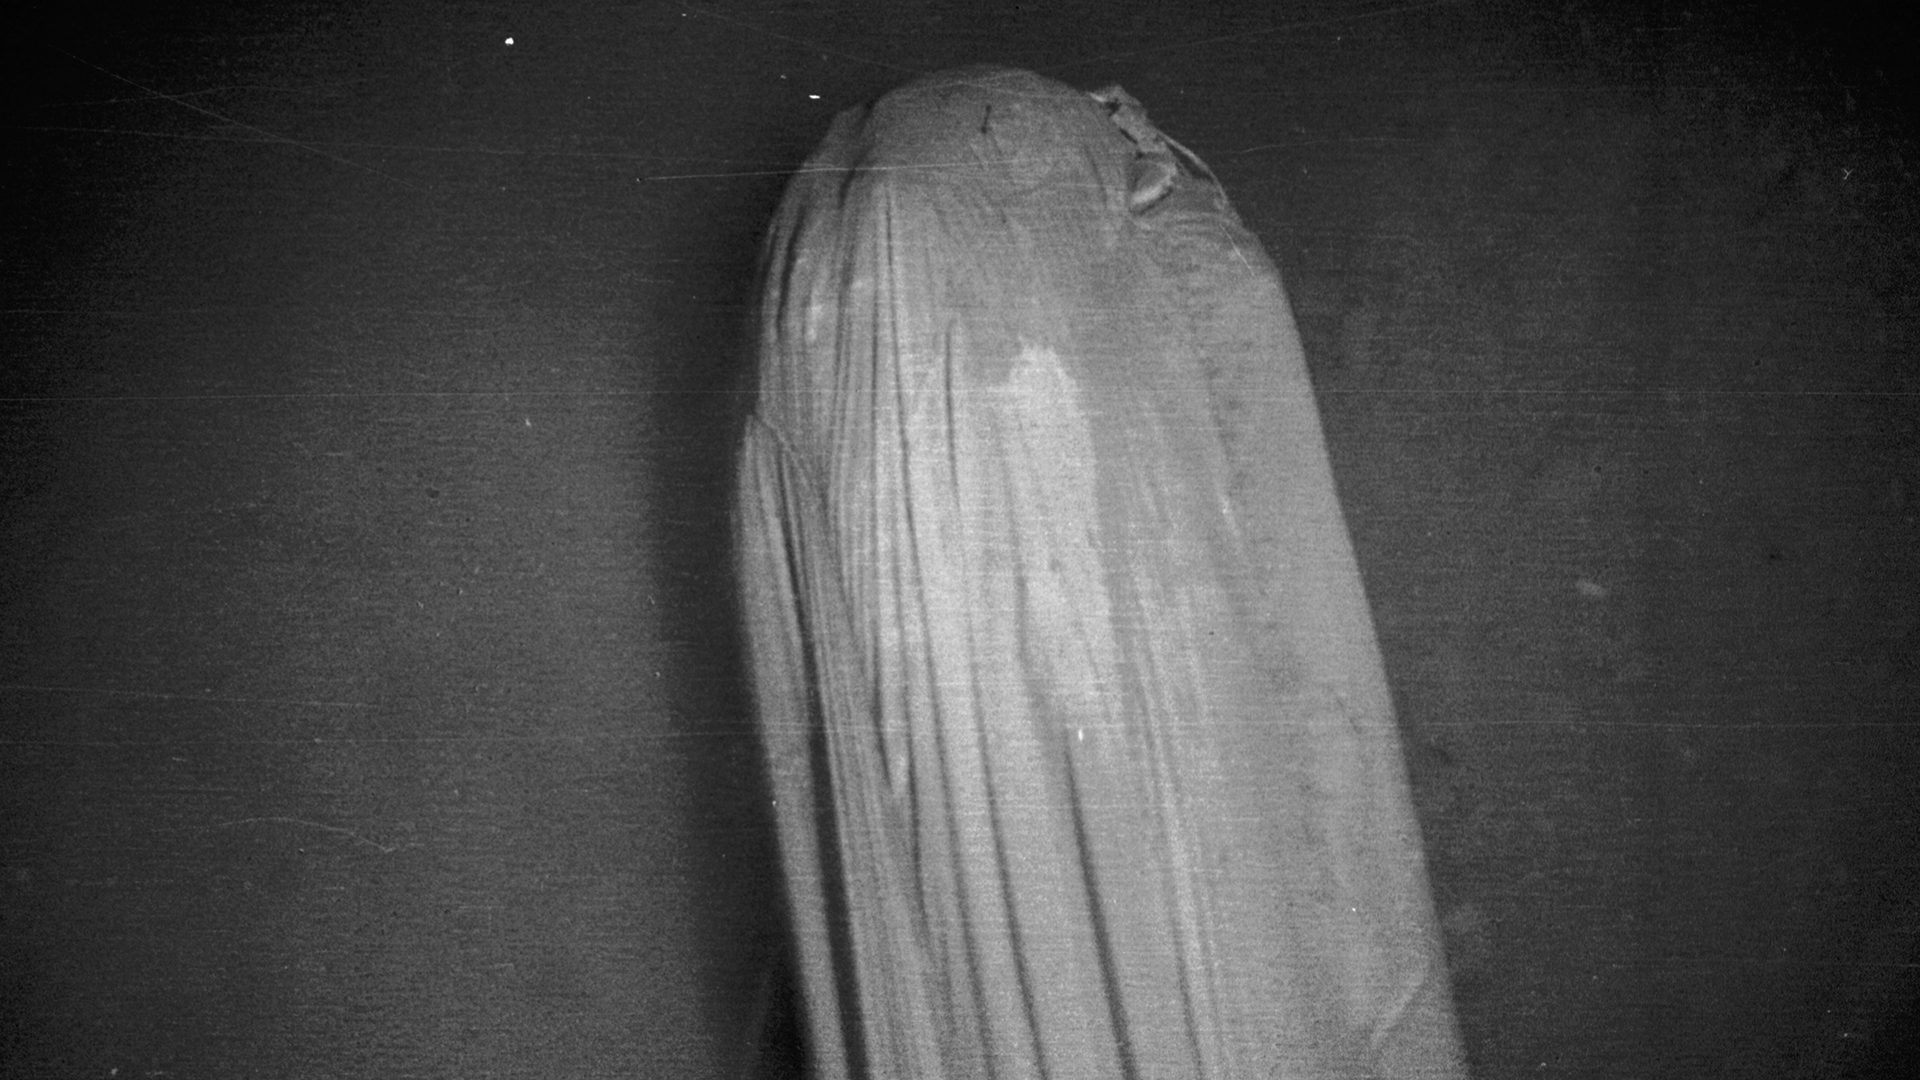 Alvin's first glimpse at the lost H-bomb on the seafloor, covered by its parachute. (Photo courtesy of WHOI Archives, © Woods Hole Oceanographic Institution)